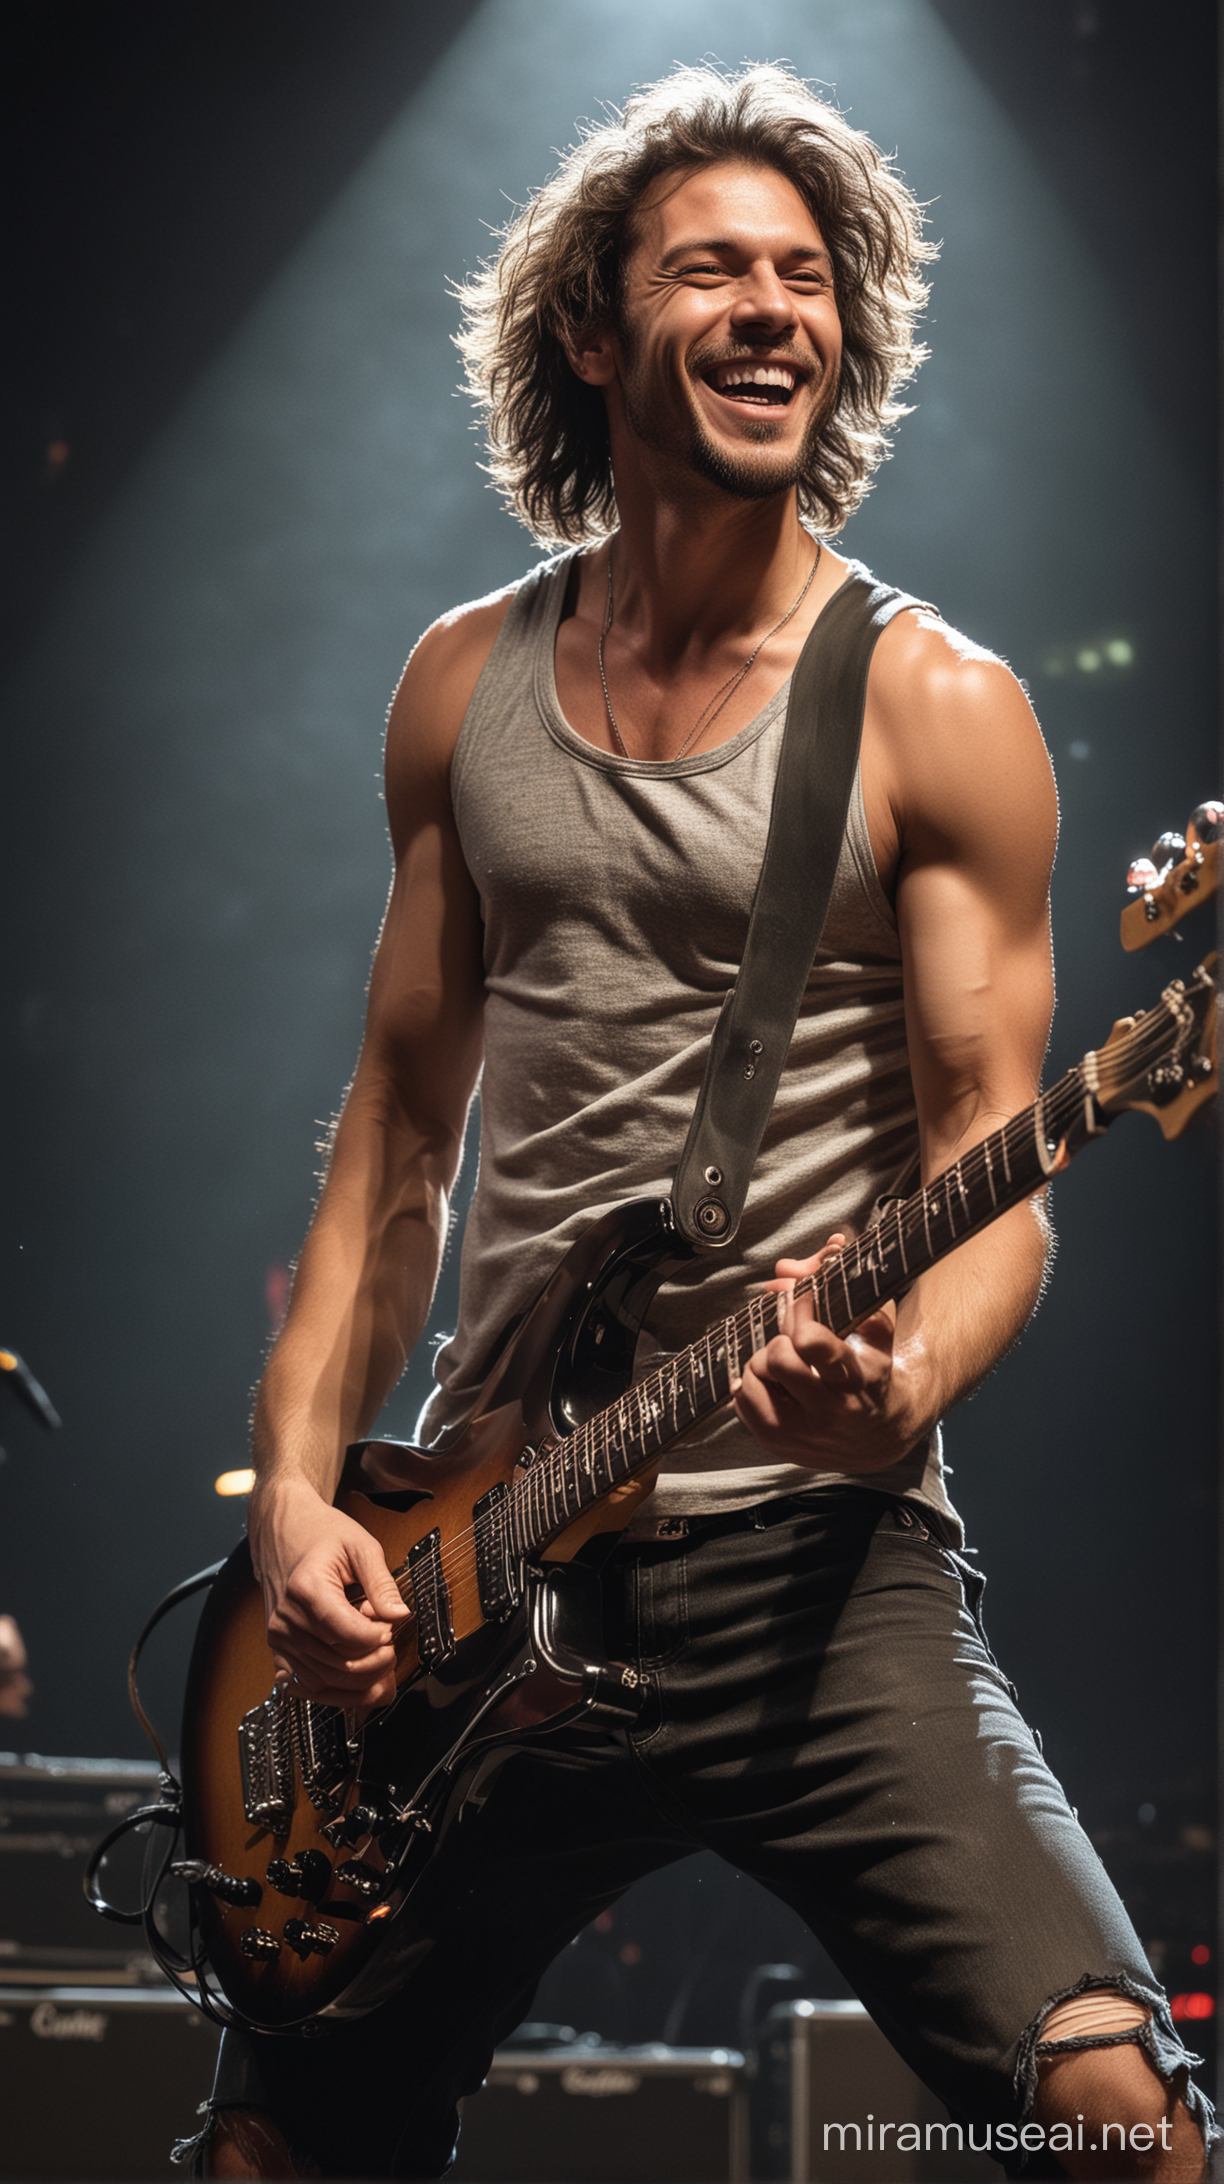 cool photo of a strong man rock guitarist in a tank top, on a stage playing his guitar, looking at the camera and smiling, it's night and the lights illuminate his face and his guitar is well lit, behind him there is an audience jumping and cheering